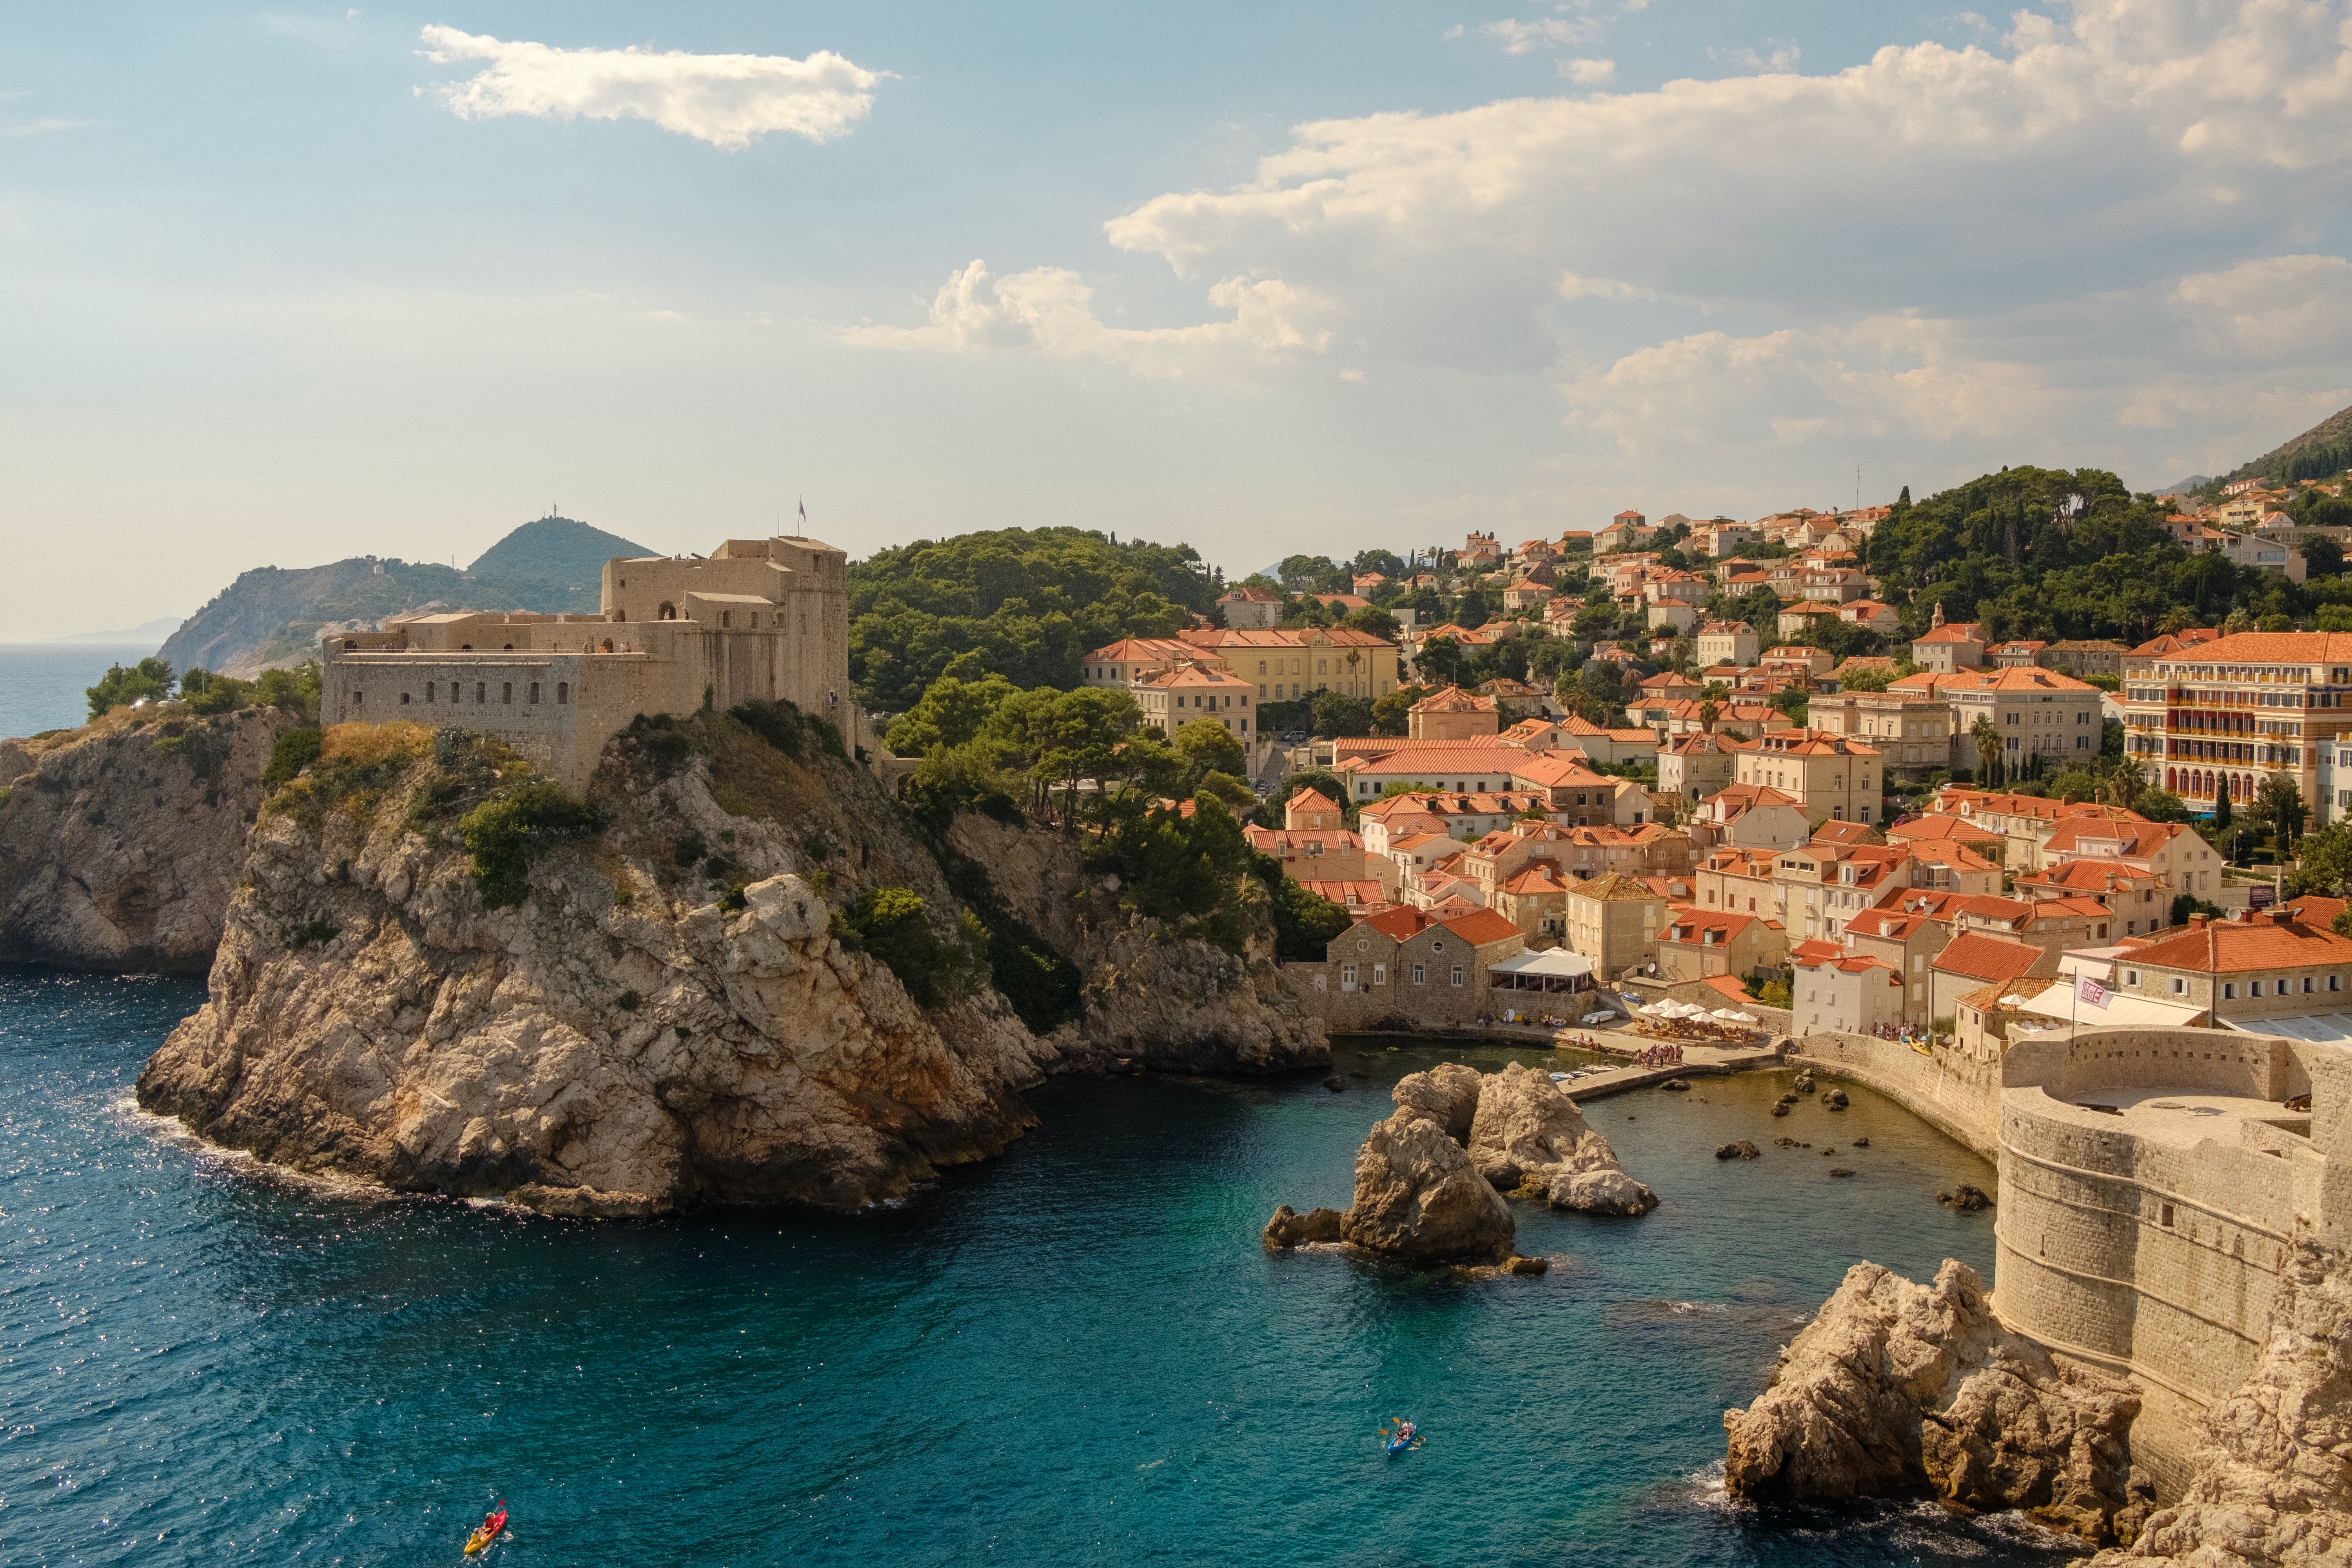 The old town of Dubrovnik, Croatia by Morgan